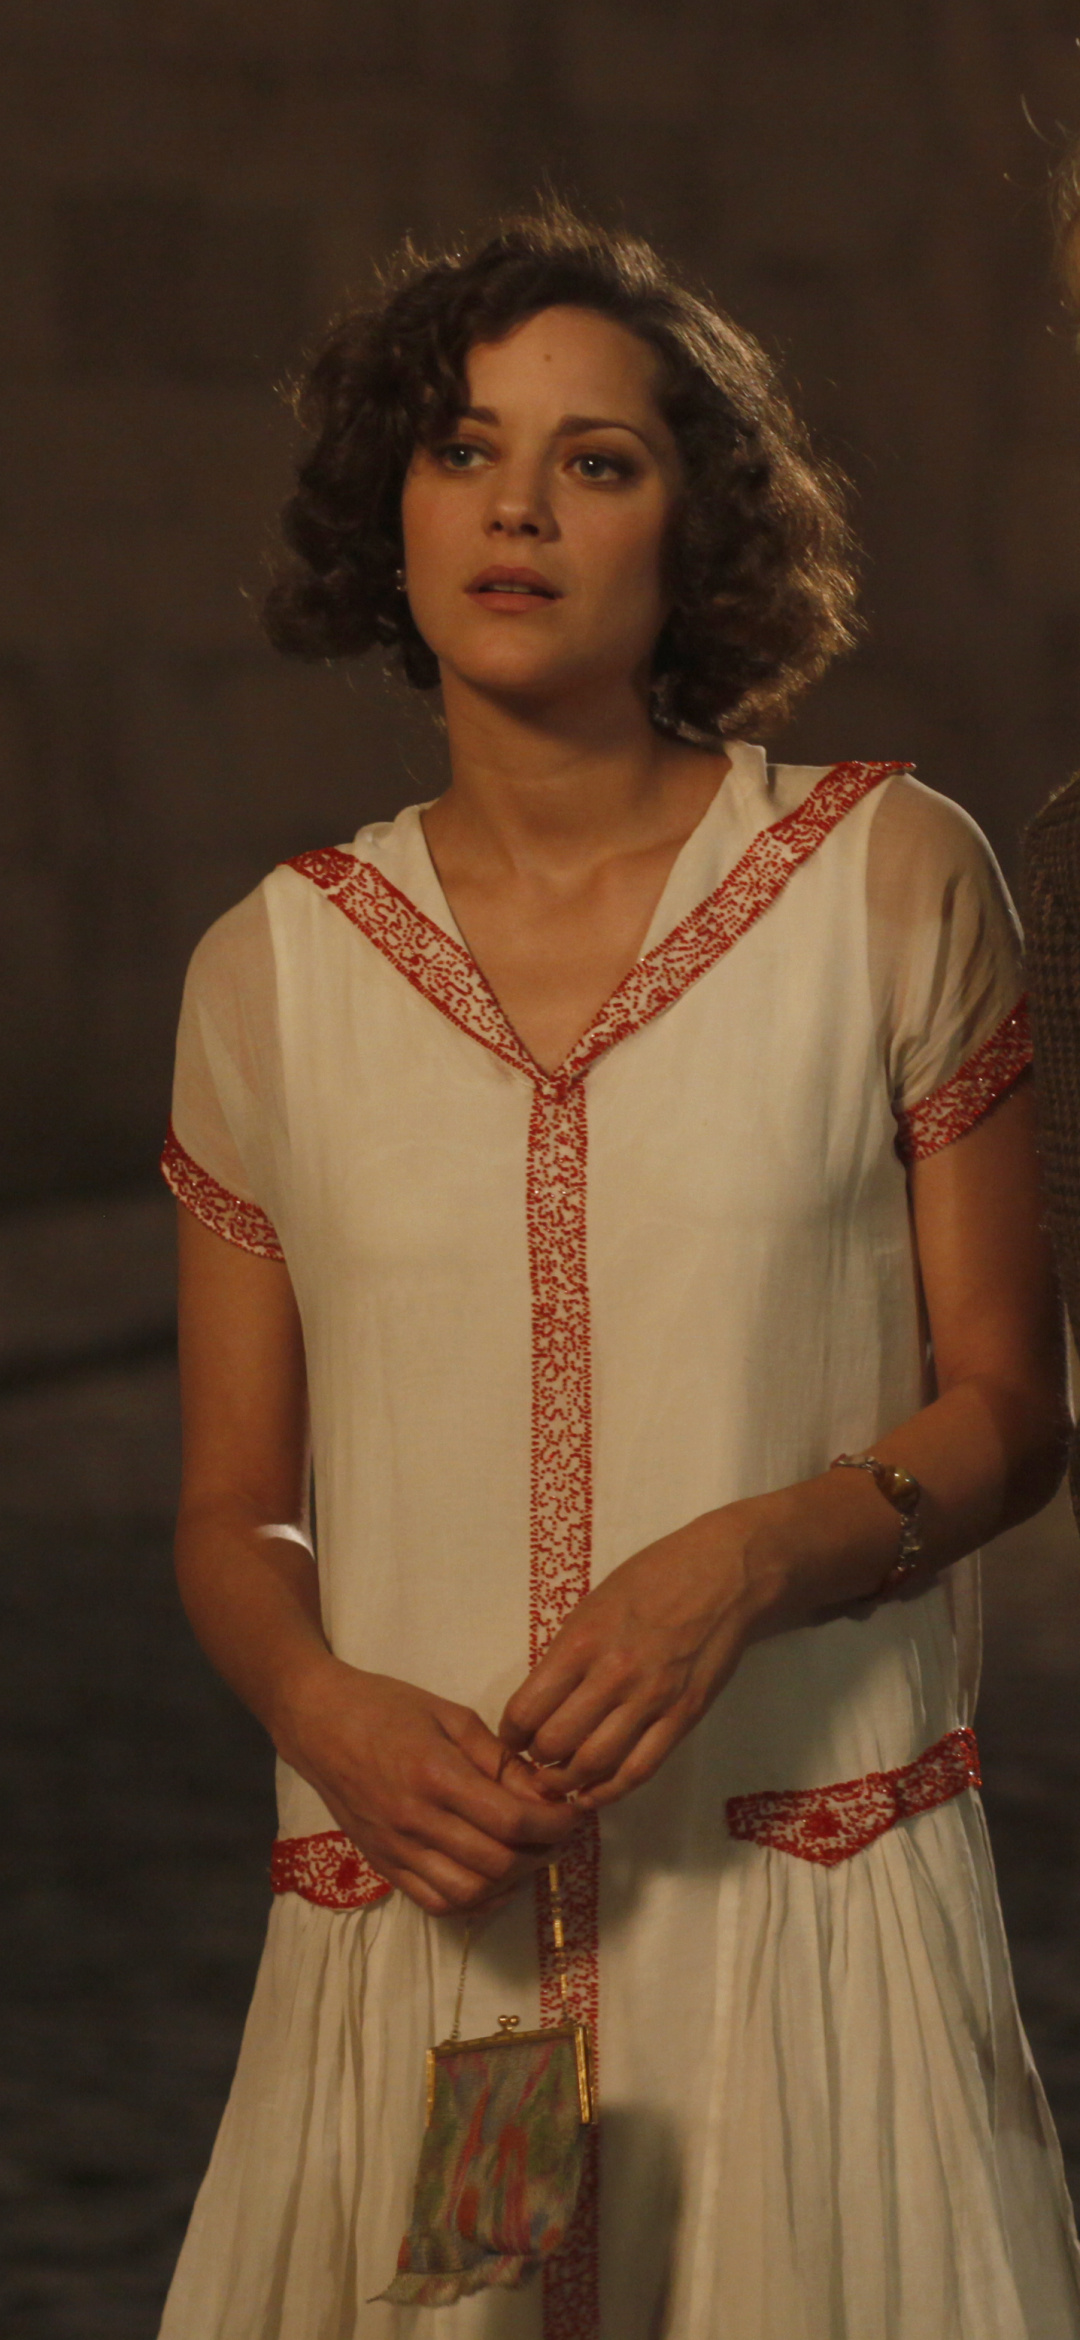 Midnight in Paris: Marion Cotillard as Adriana, fictionalised mistress of Picasso. 1080x2340 HD Wallpaper.